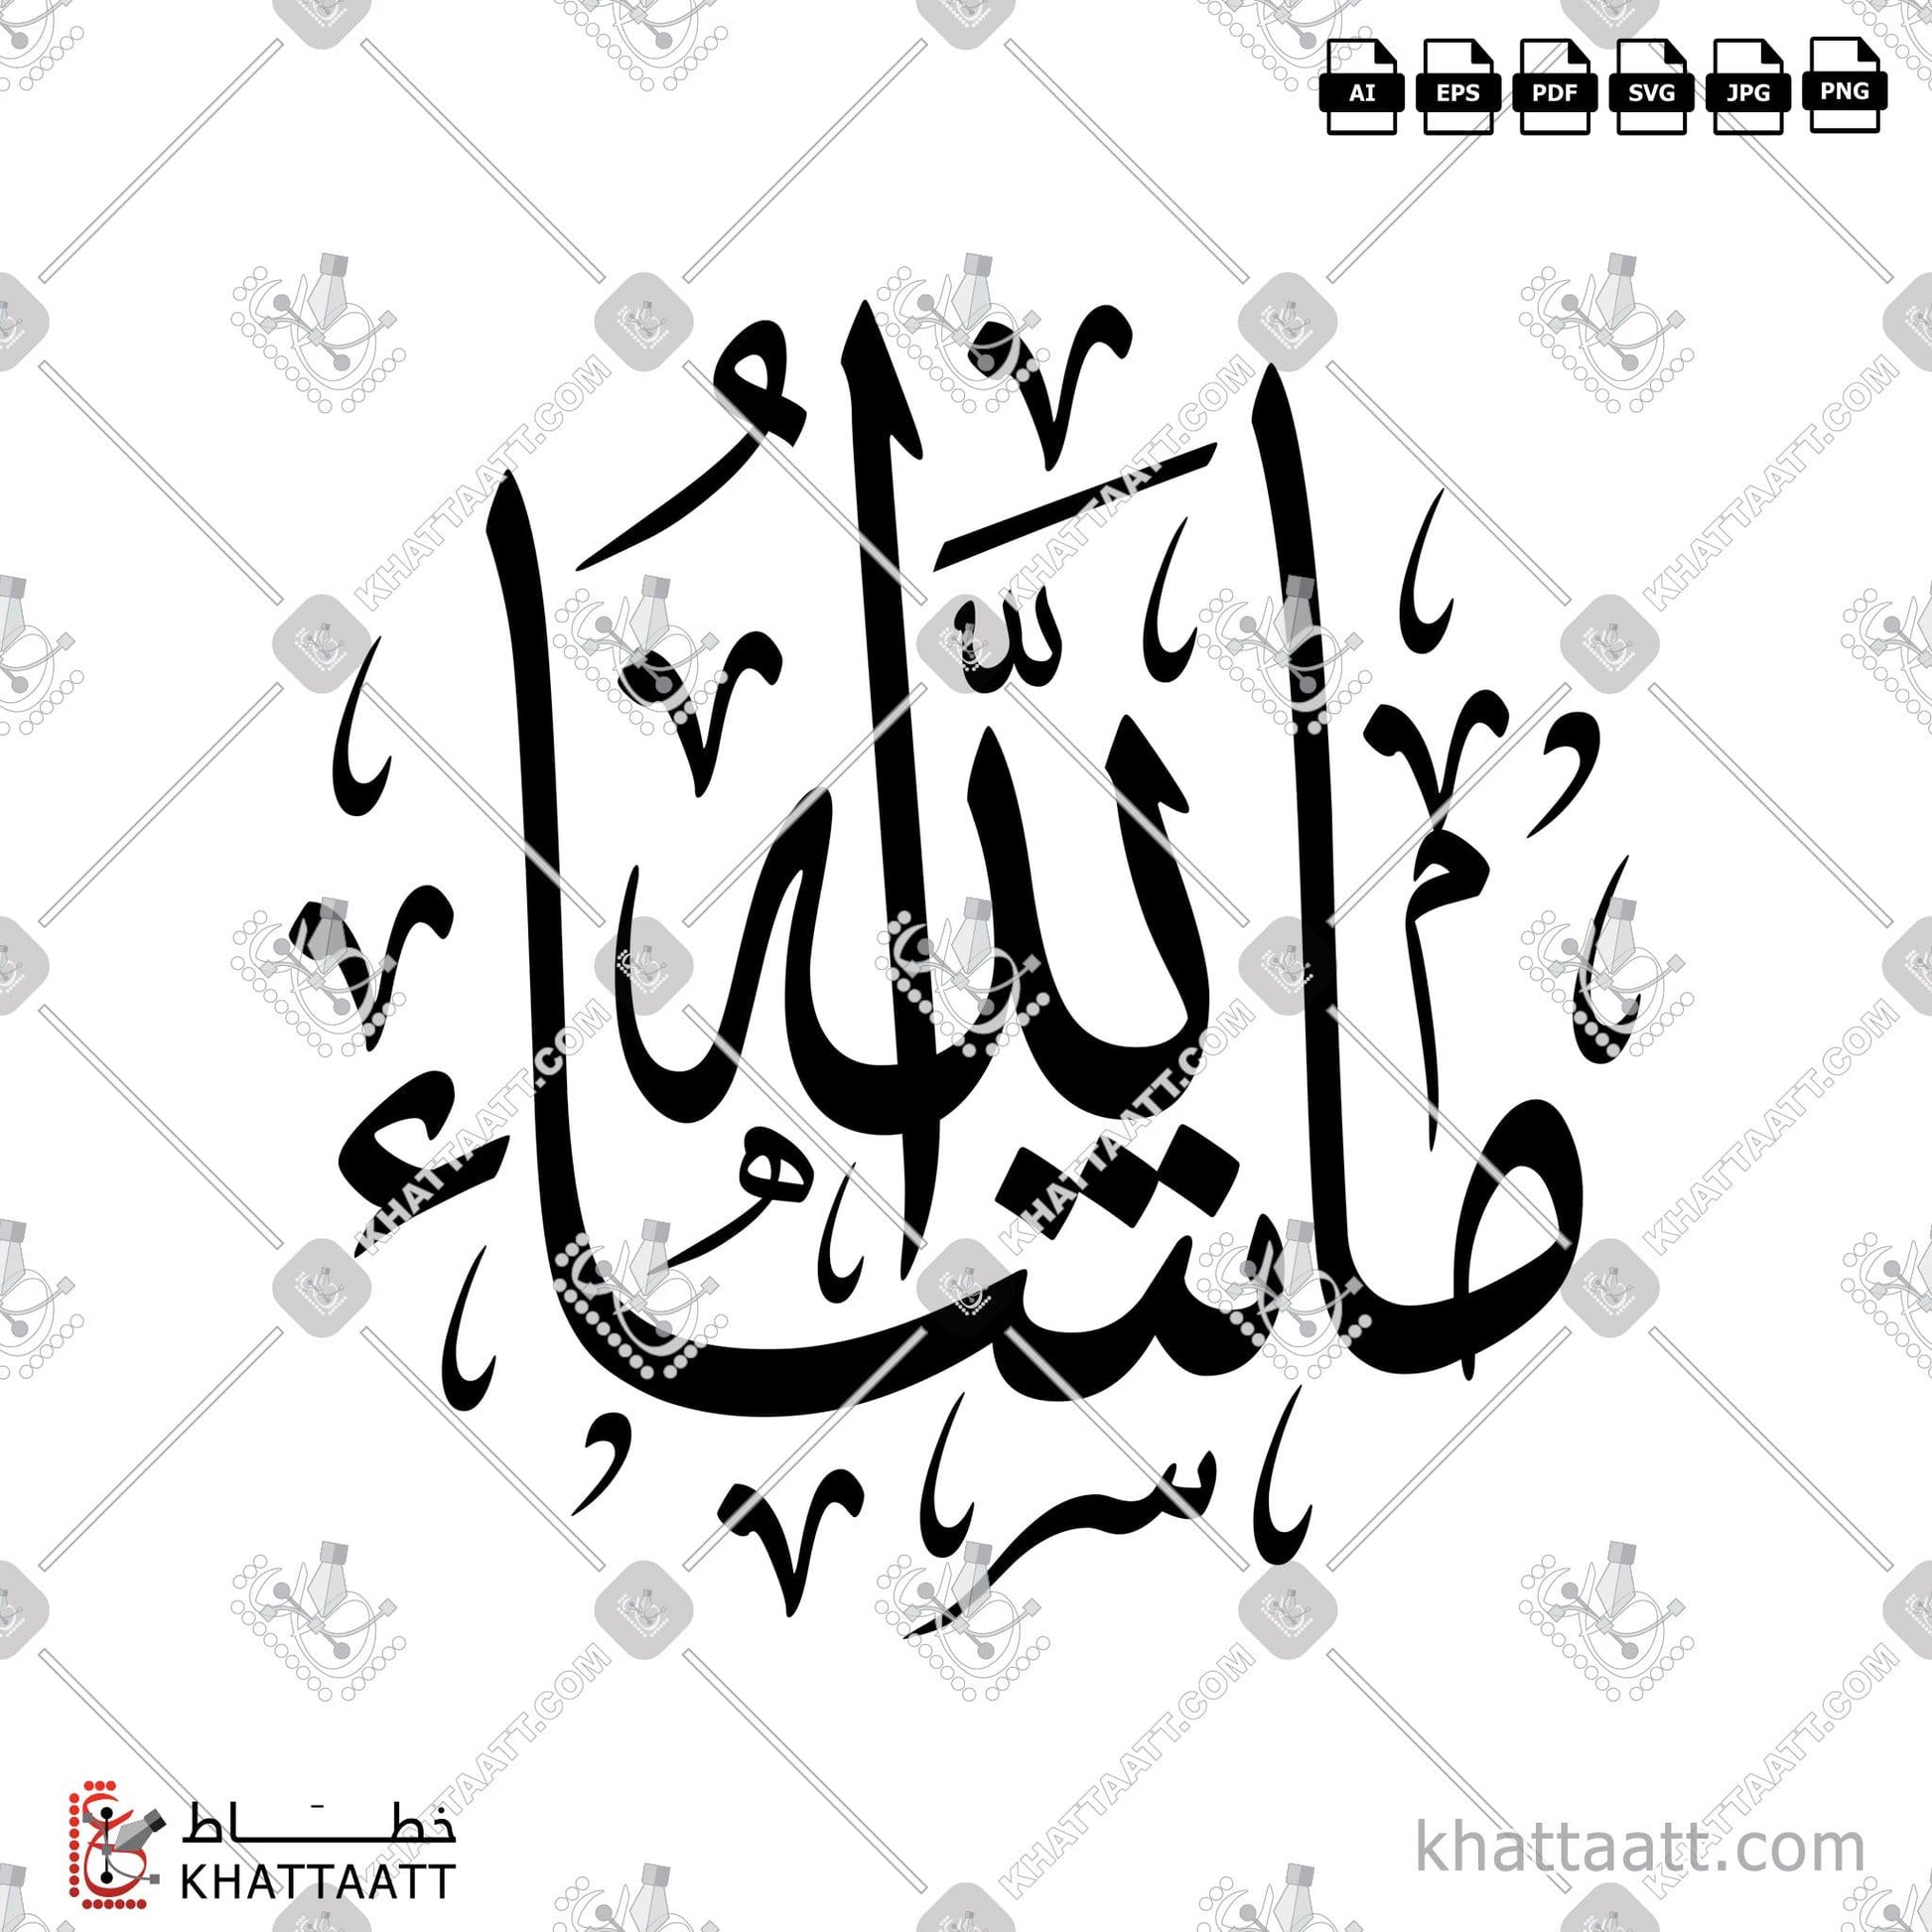 Download Arabic Calligraphy of MASHALLAH - ما شاء الله in Thuluth - خط الثلث in vector and .png